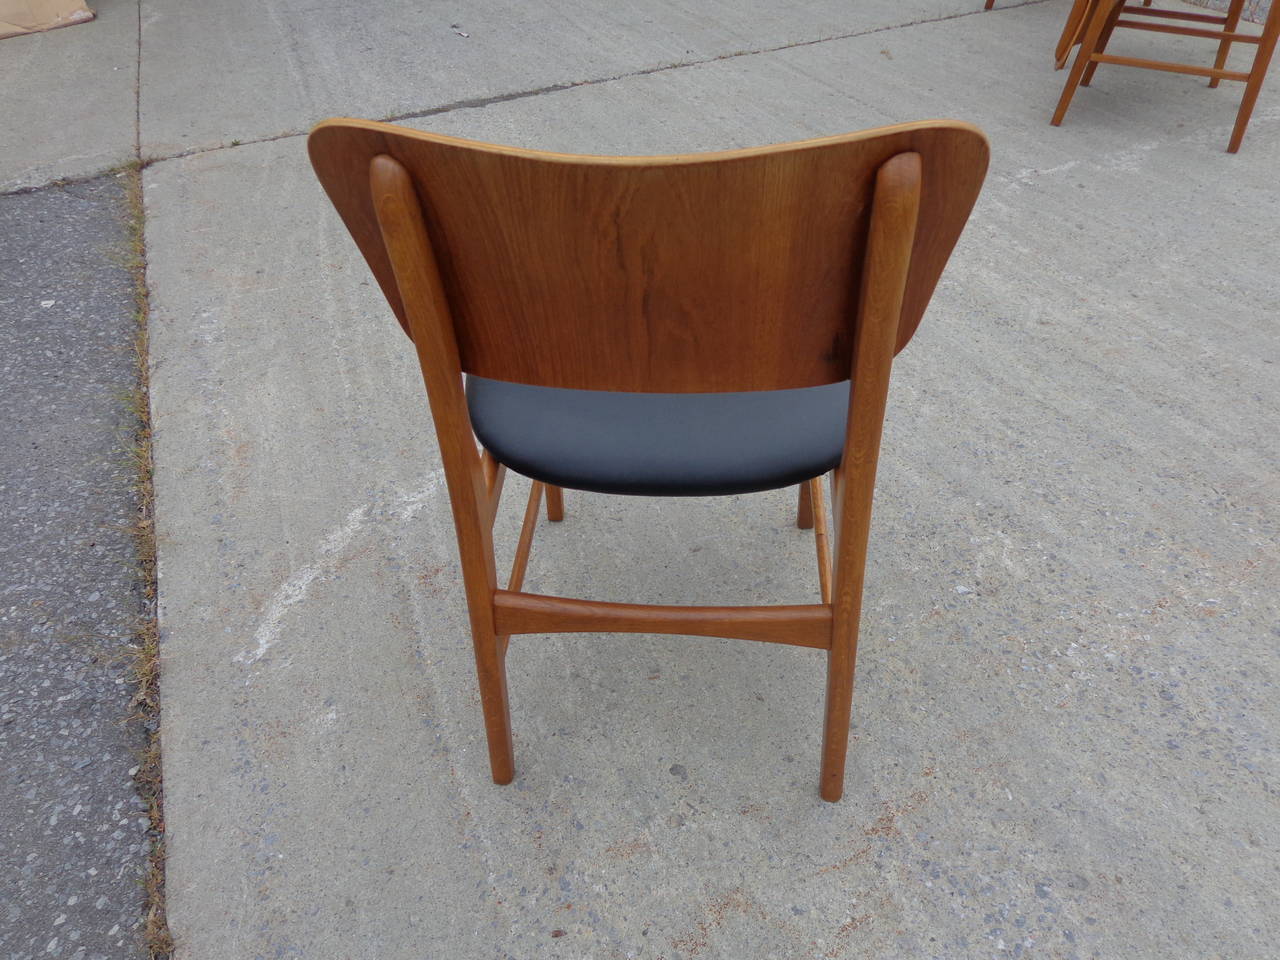 Ib Kofod-Larsen Oak Frame Chair with Teak Back and New Leatherette Upholstery In Excellent Condition For Sale In Ottawa, ON